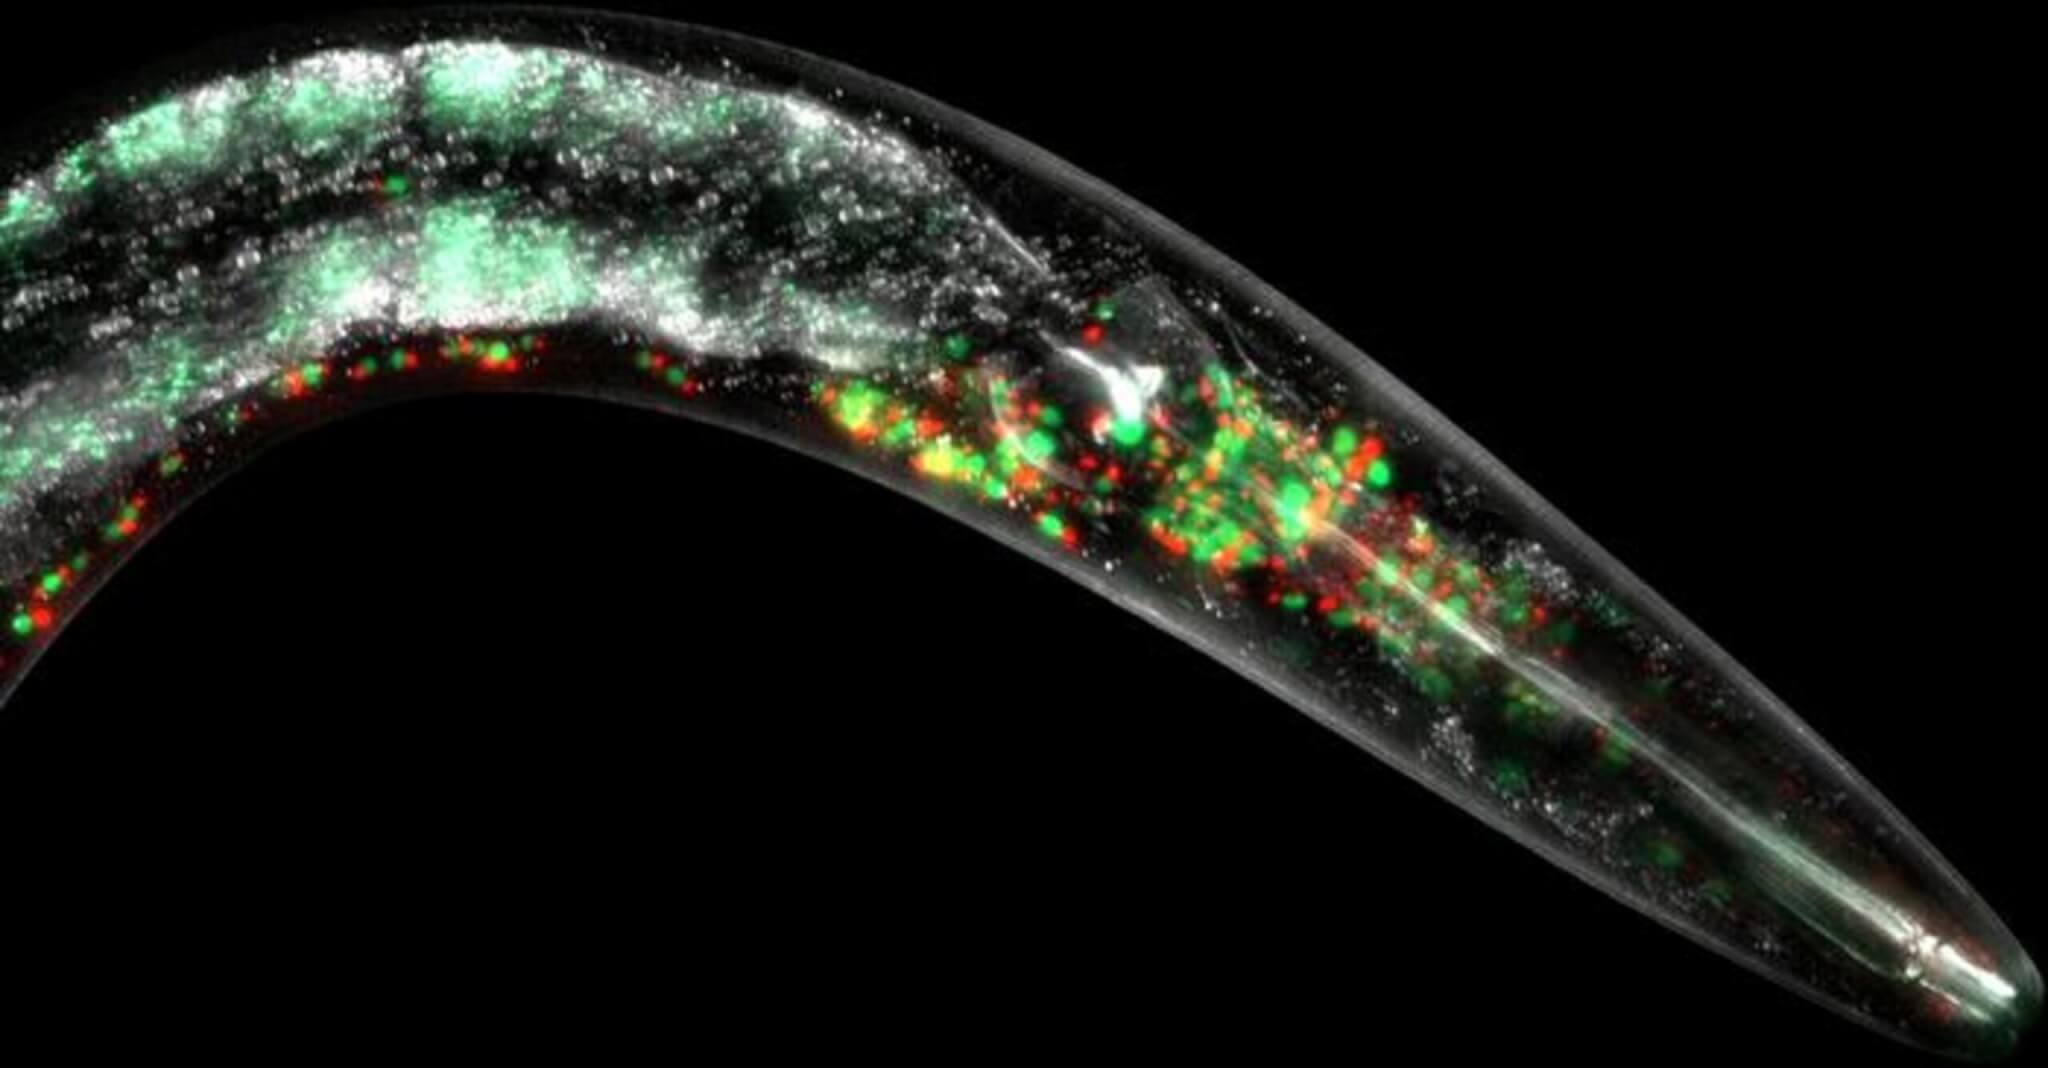 A live C. elegans animal with the mitochondria in its nervous system decorated with red and green fluorescent proteins